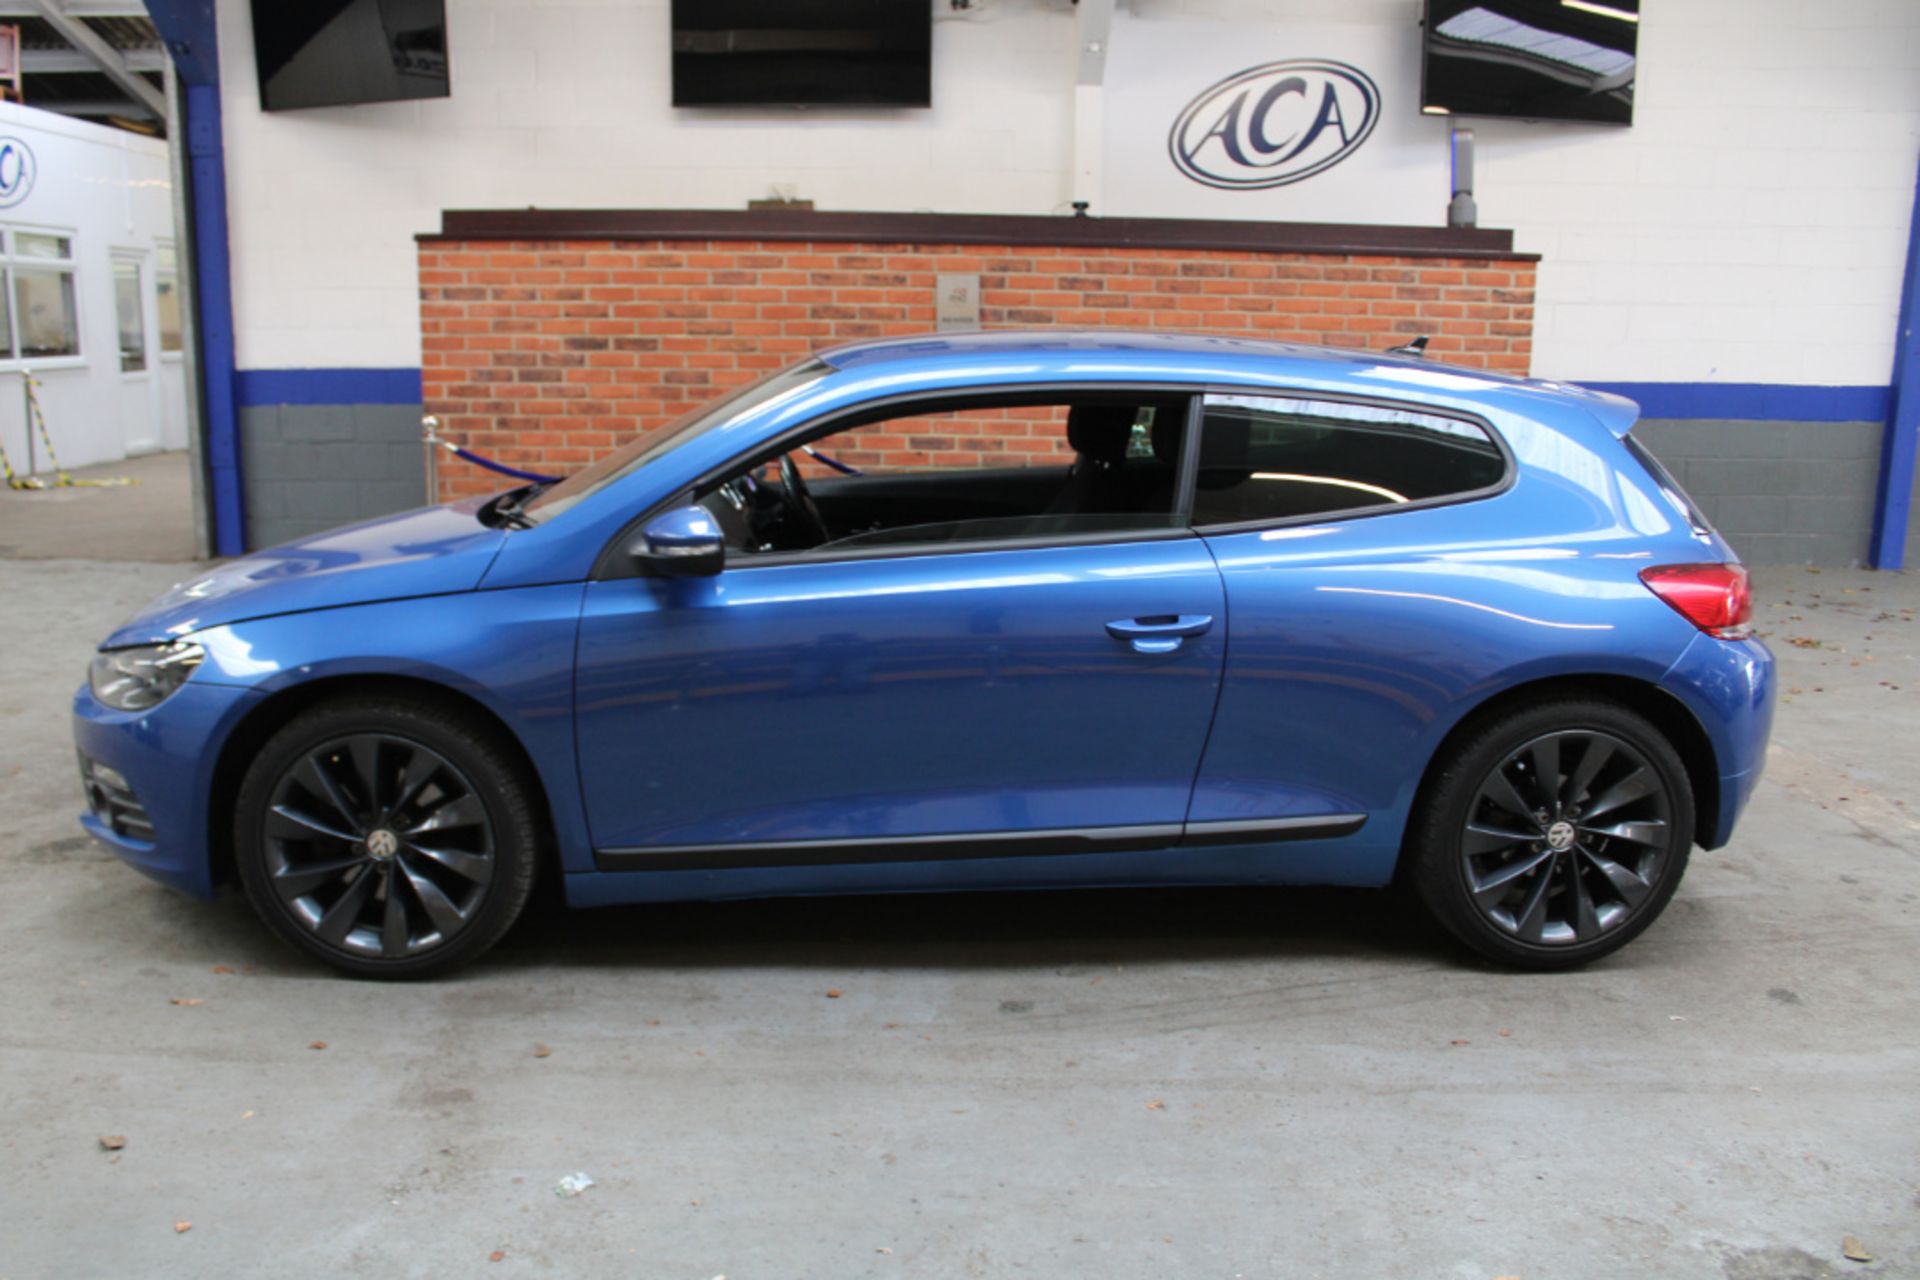 58 08 VW Scirocco GT S-A - Image 7 of 20